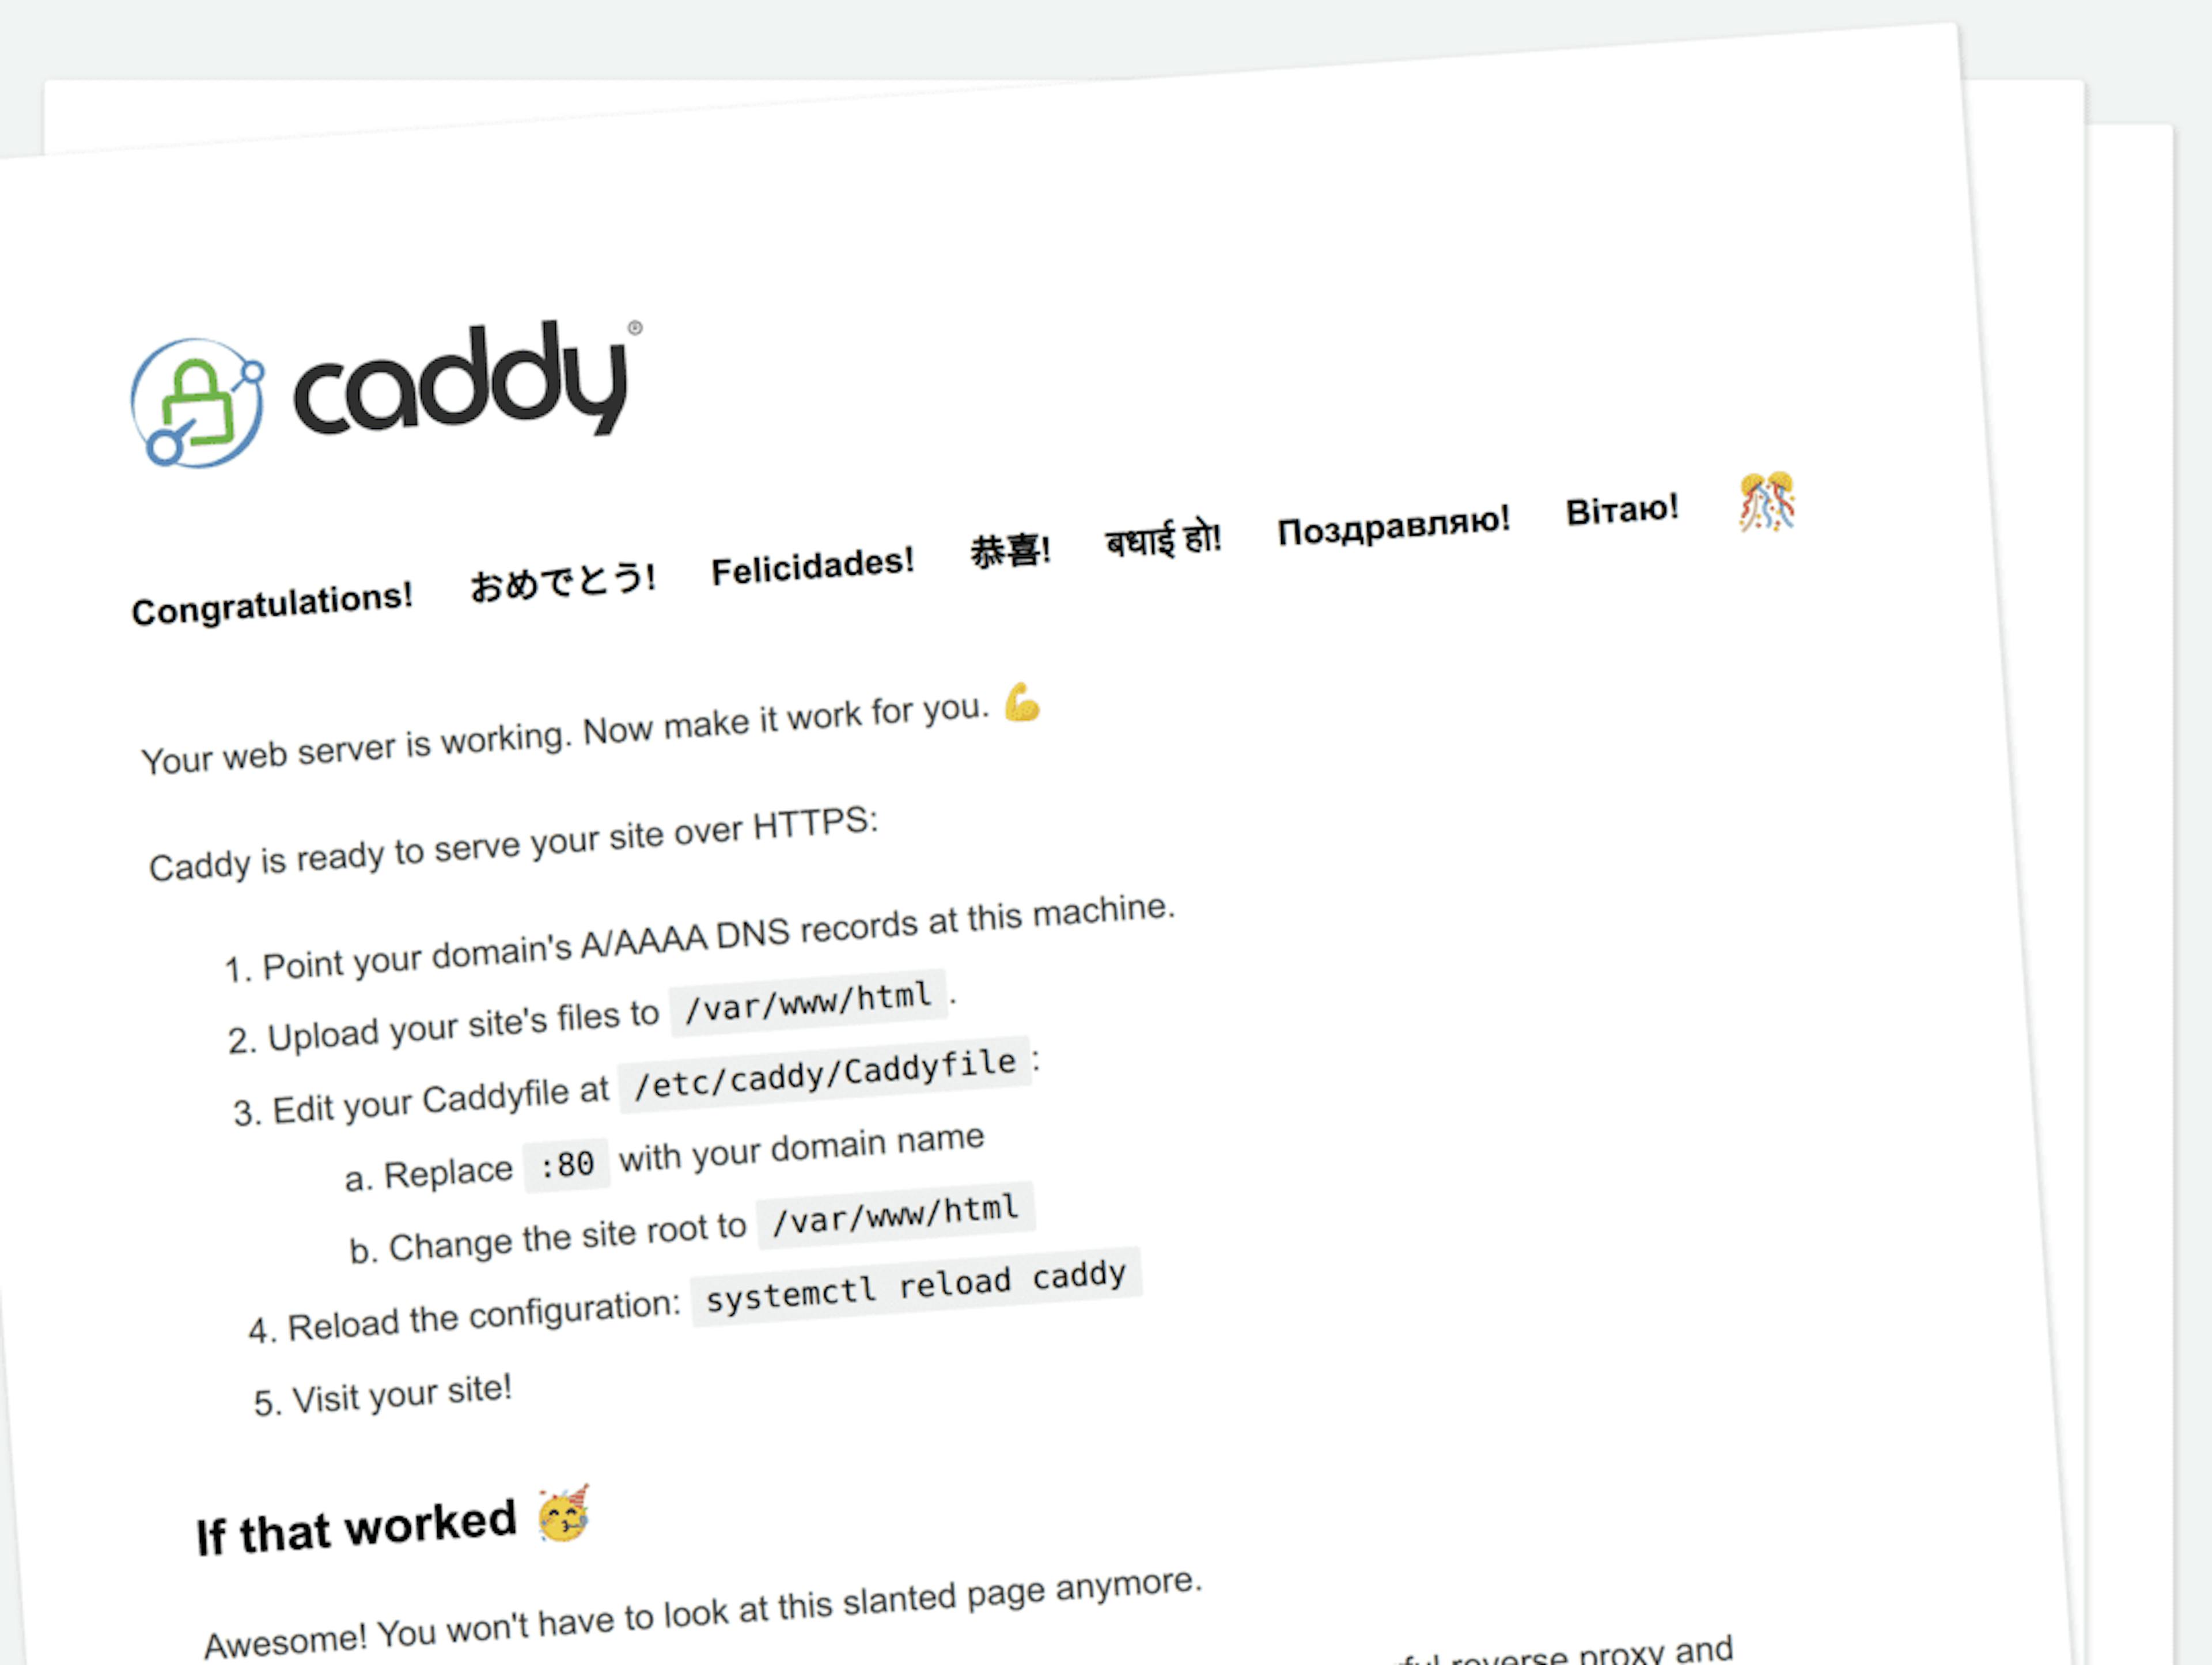 Default Caddy homepage with instructions on how to get started.